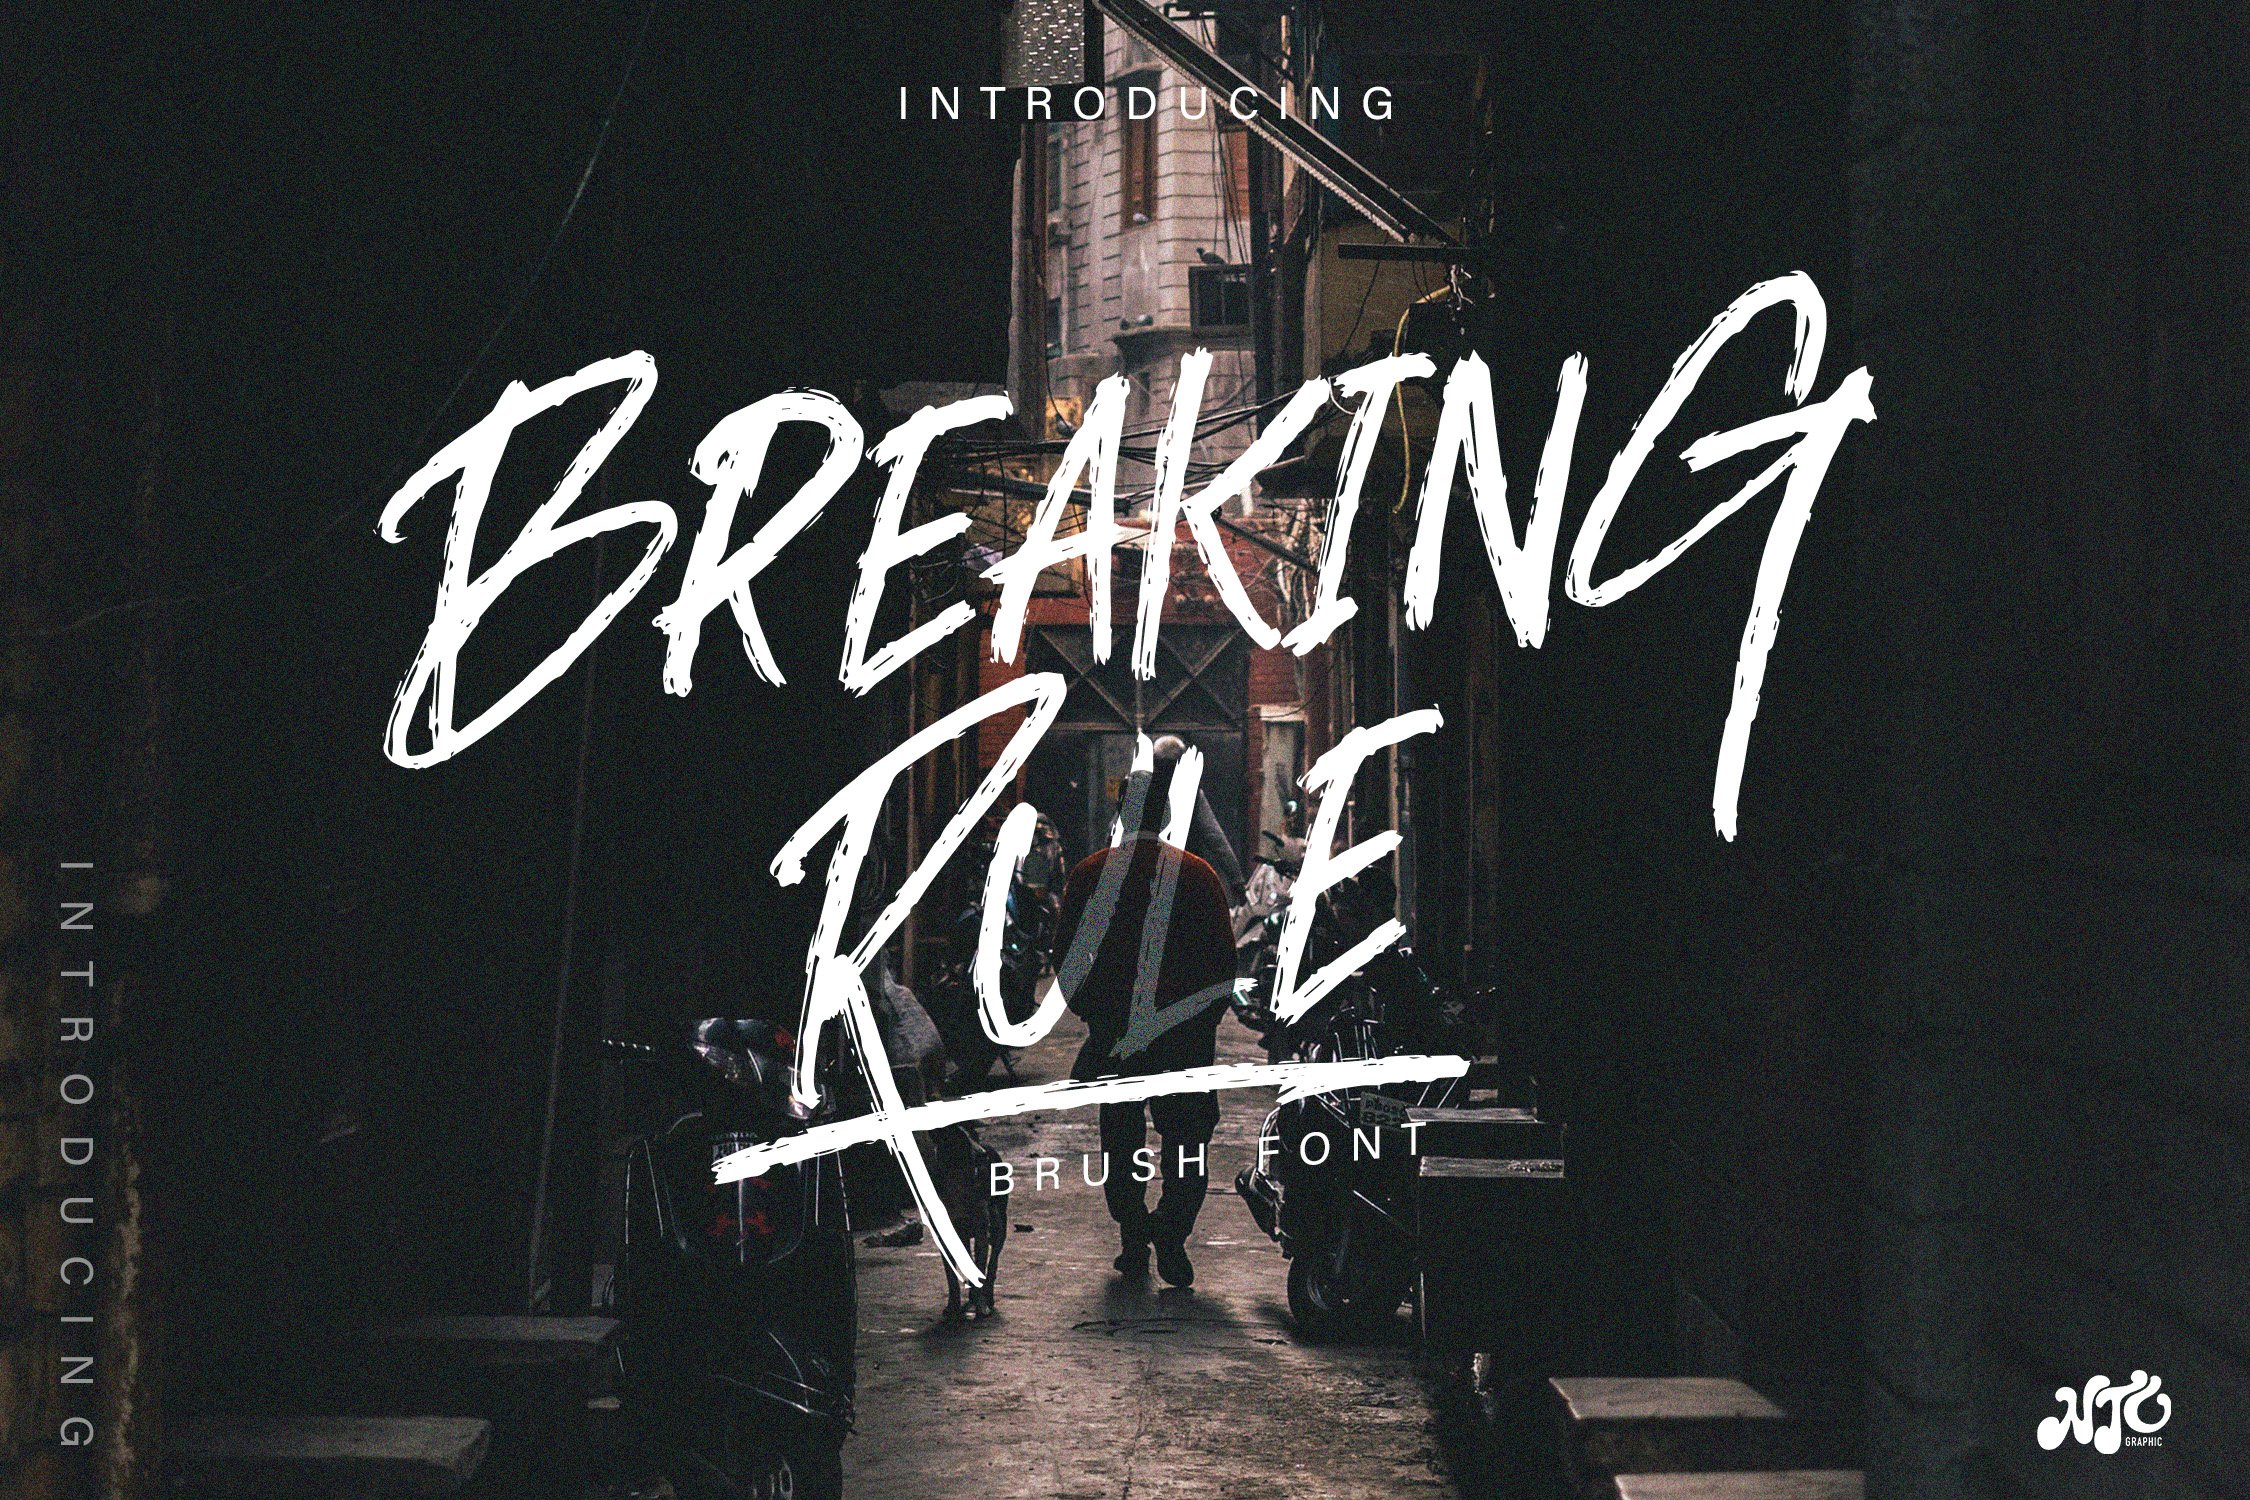 BREAKING RULE - Rough Brush Font cover image.